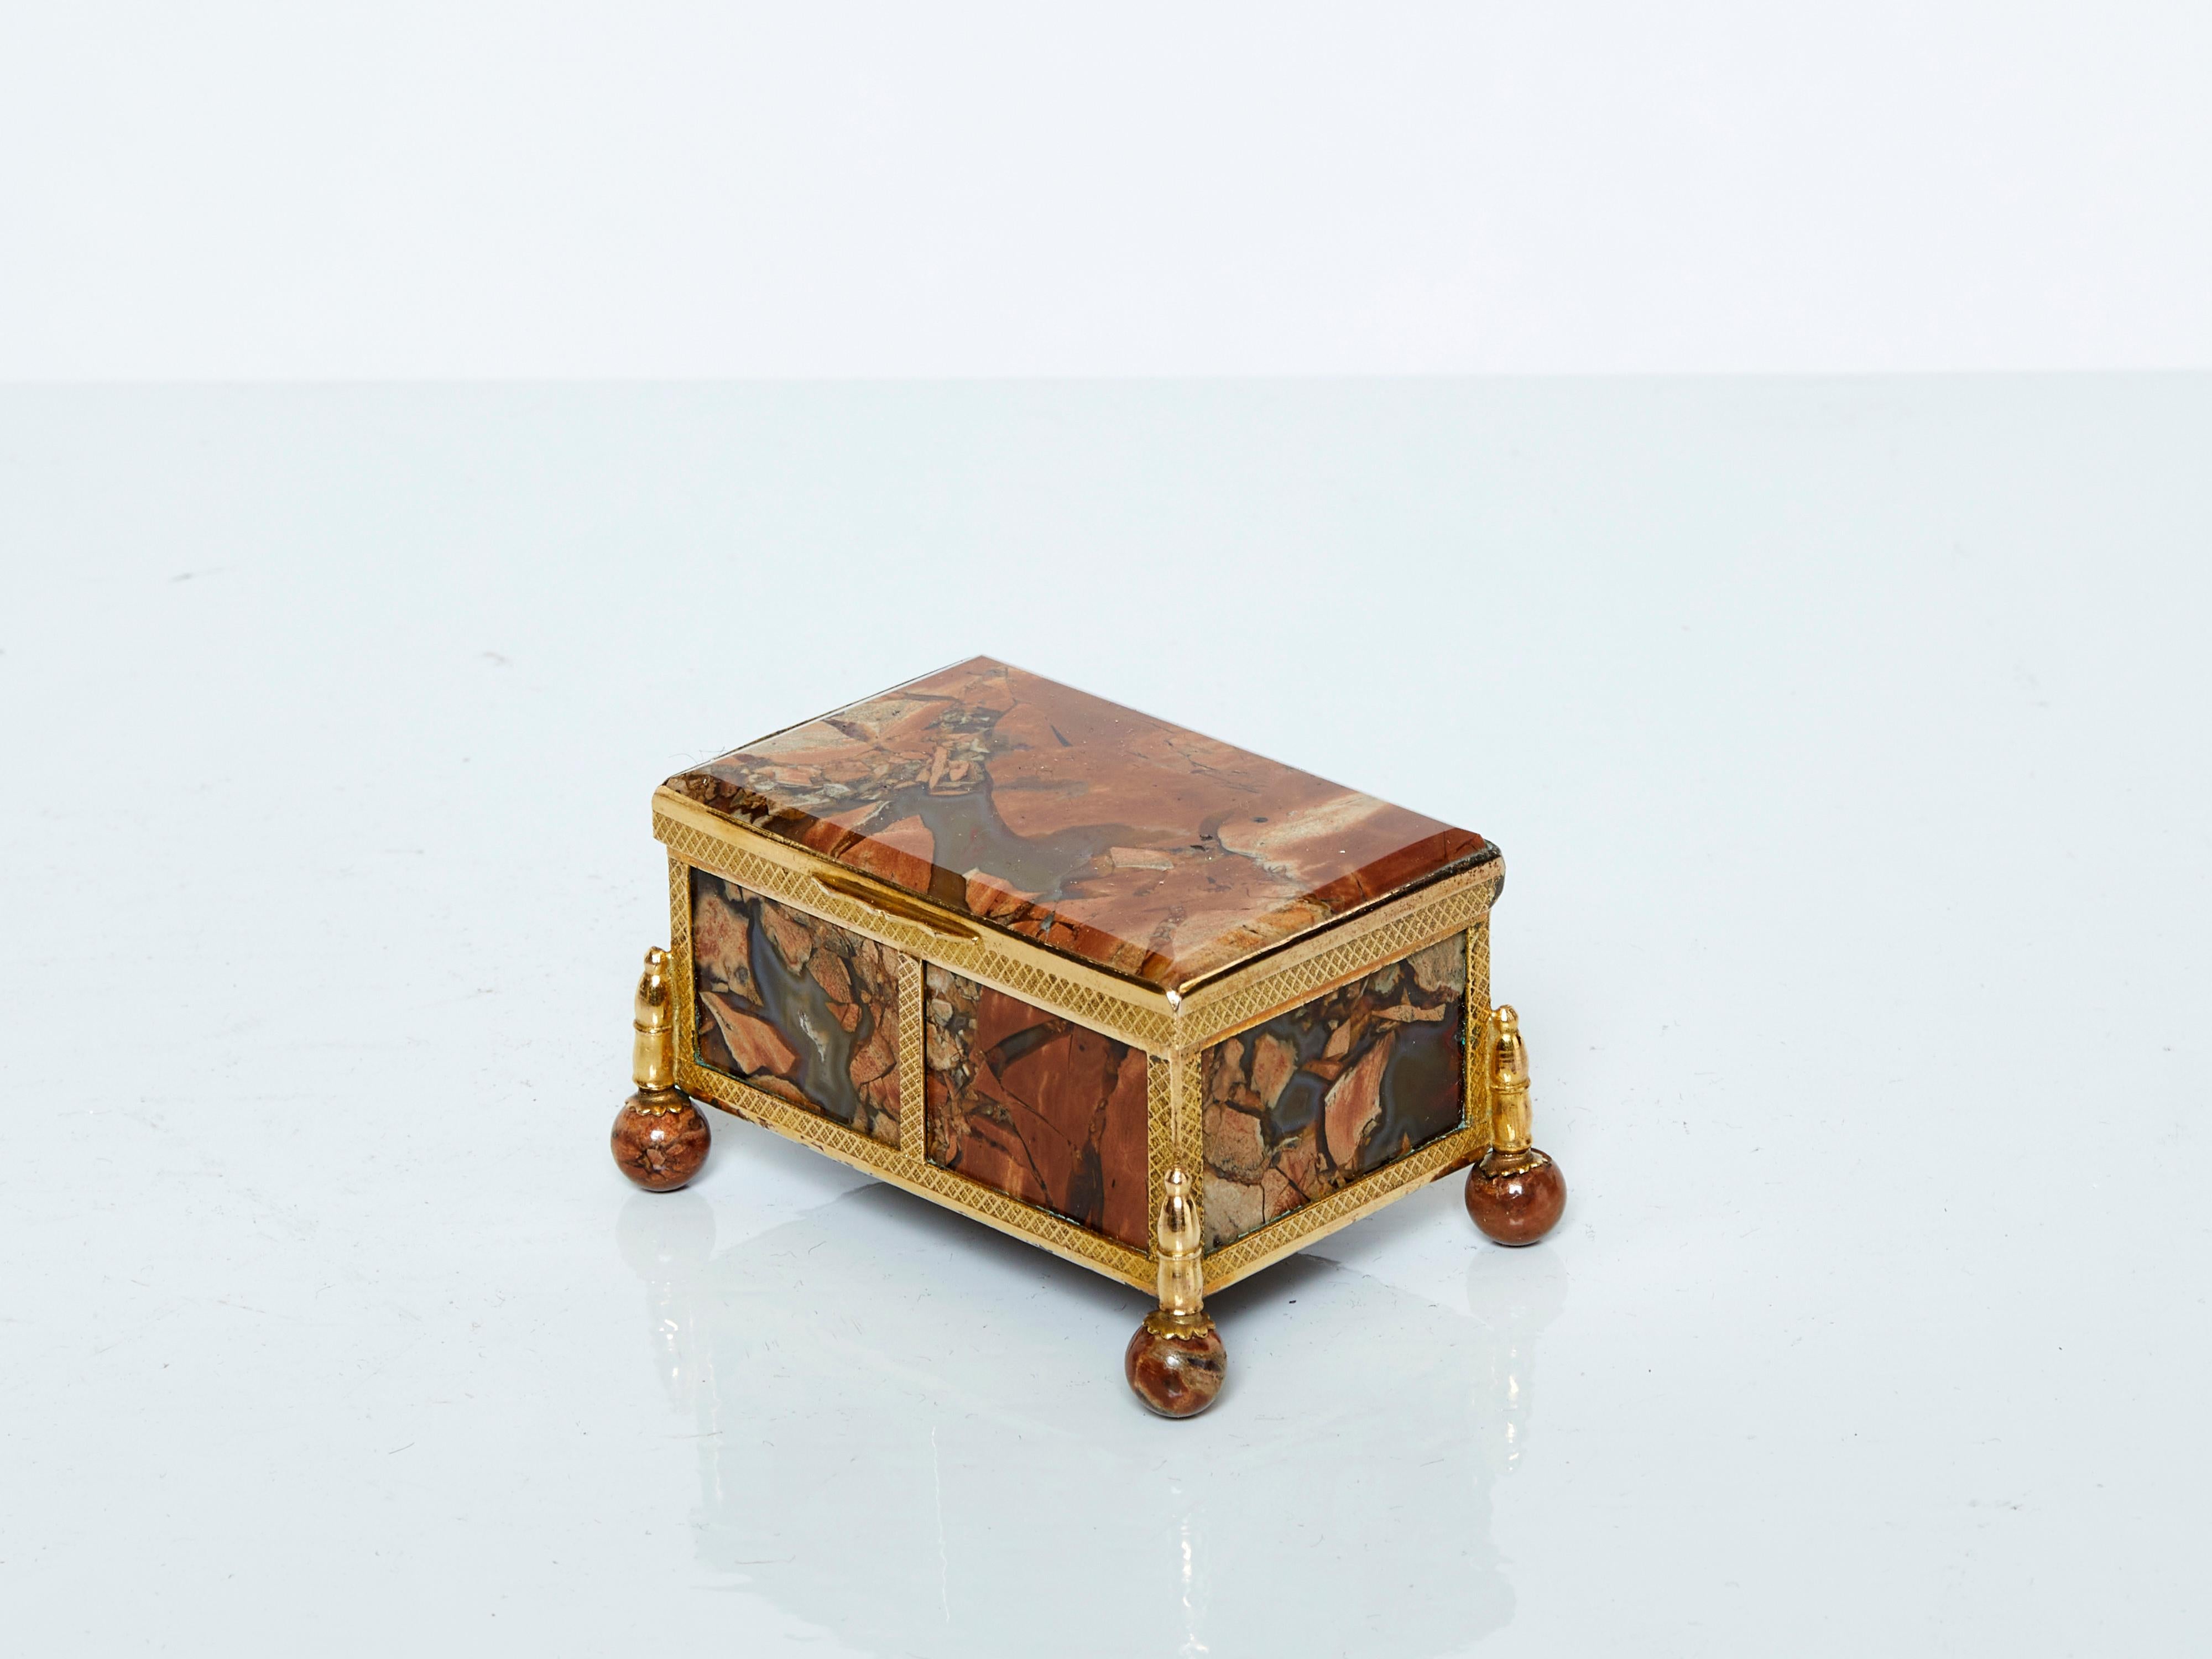 A beautiful French 19th century Napoleon III polished agate and brass mounted jewellery box, all sides composed with a total of height panels of vividly-hued red agate stone, atop ball agate feet. A collectible piece, fully cleaned, and found in a